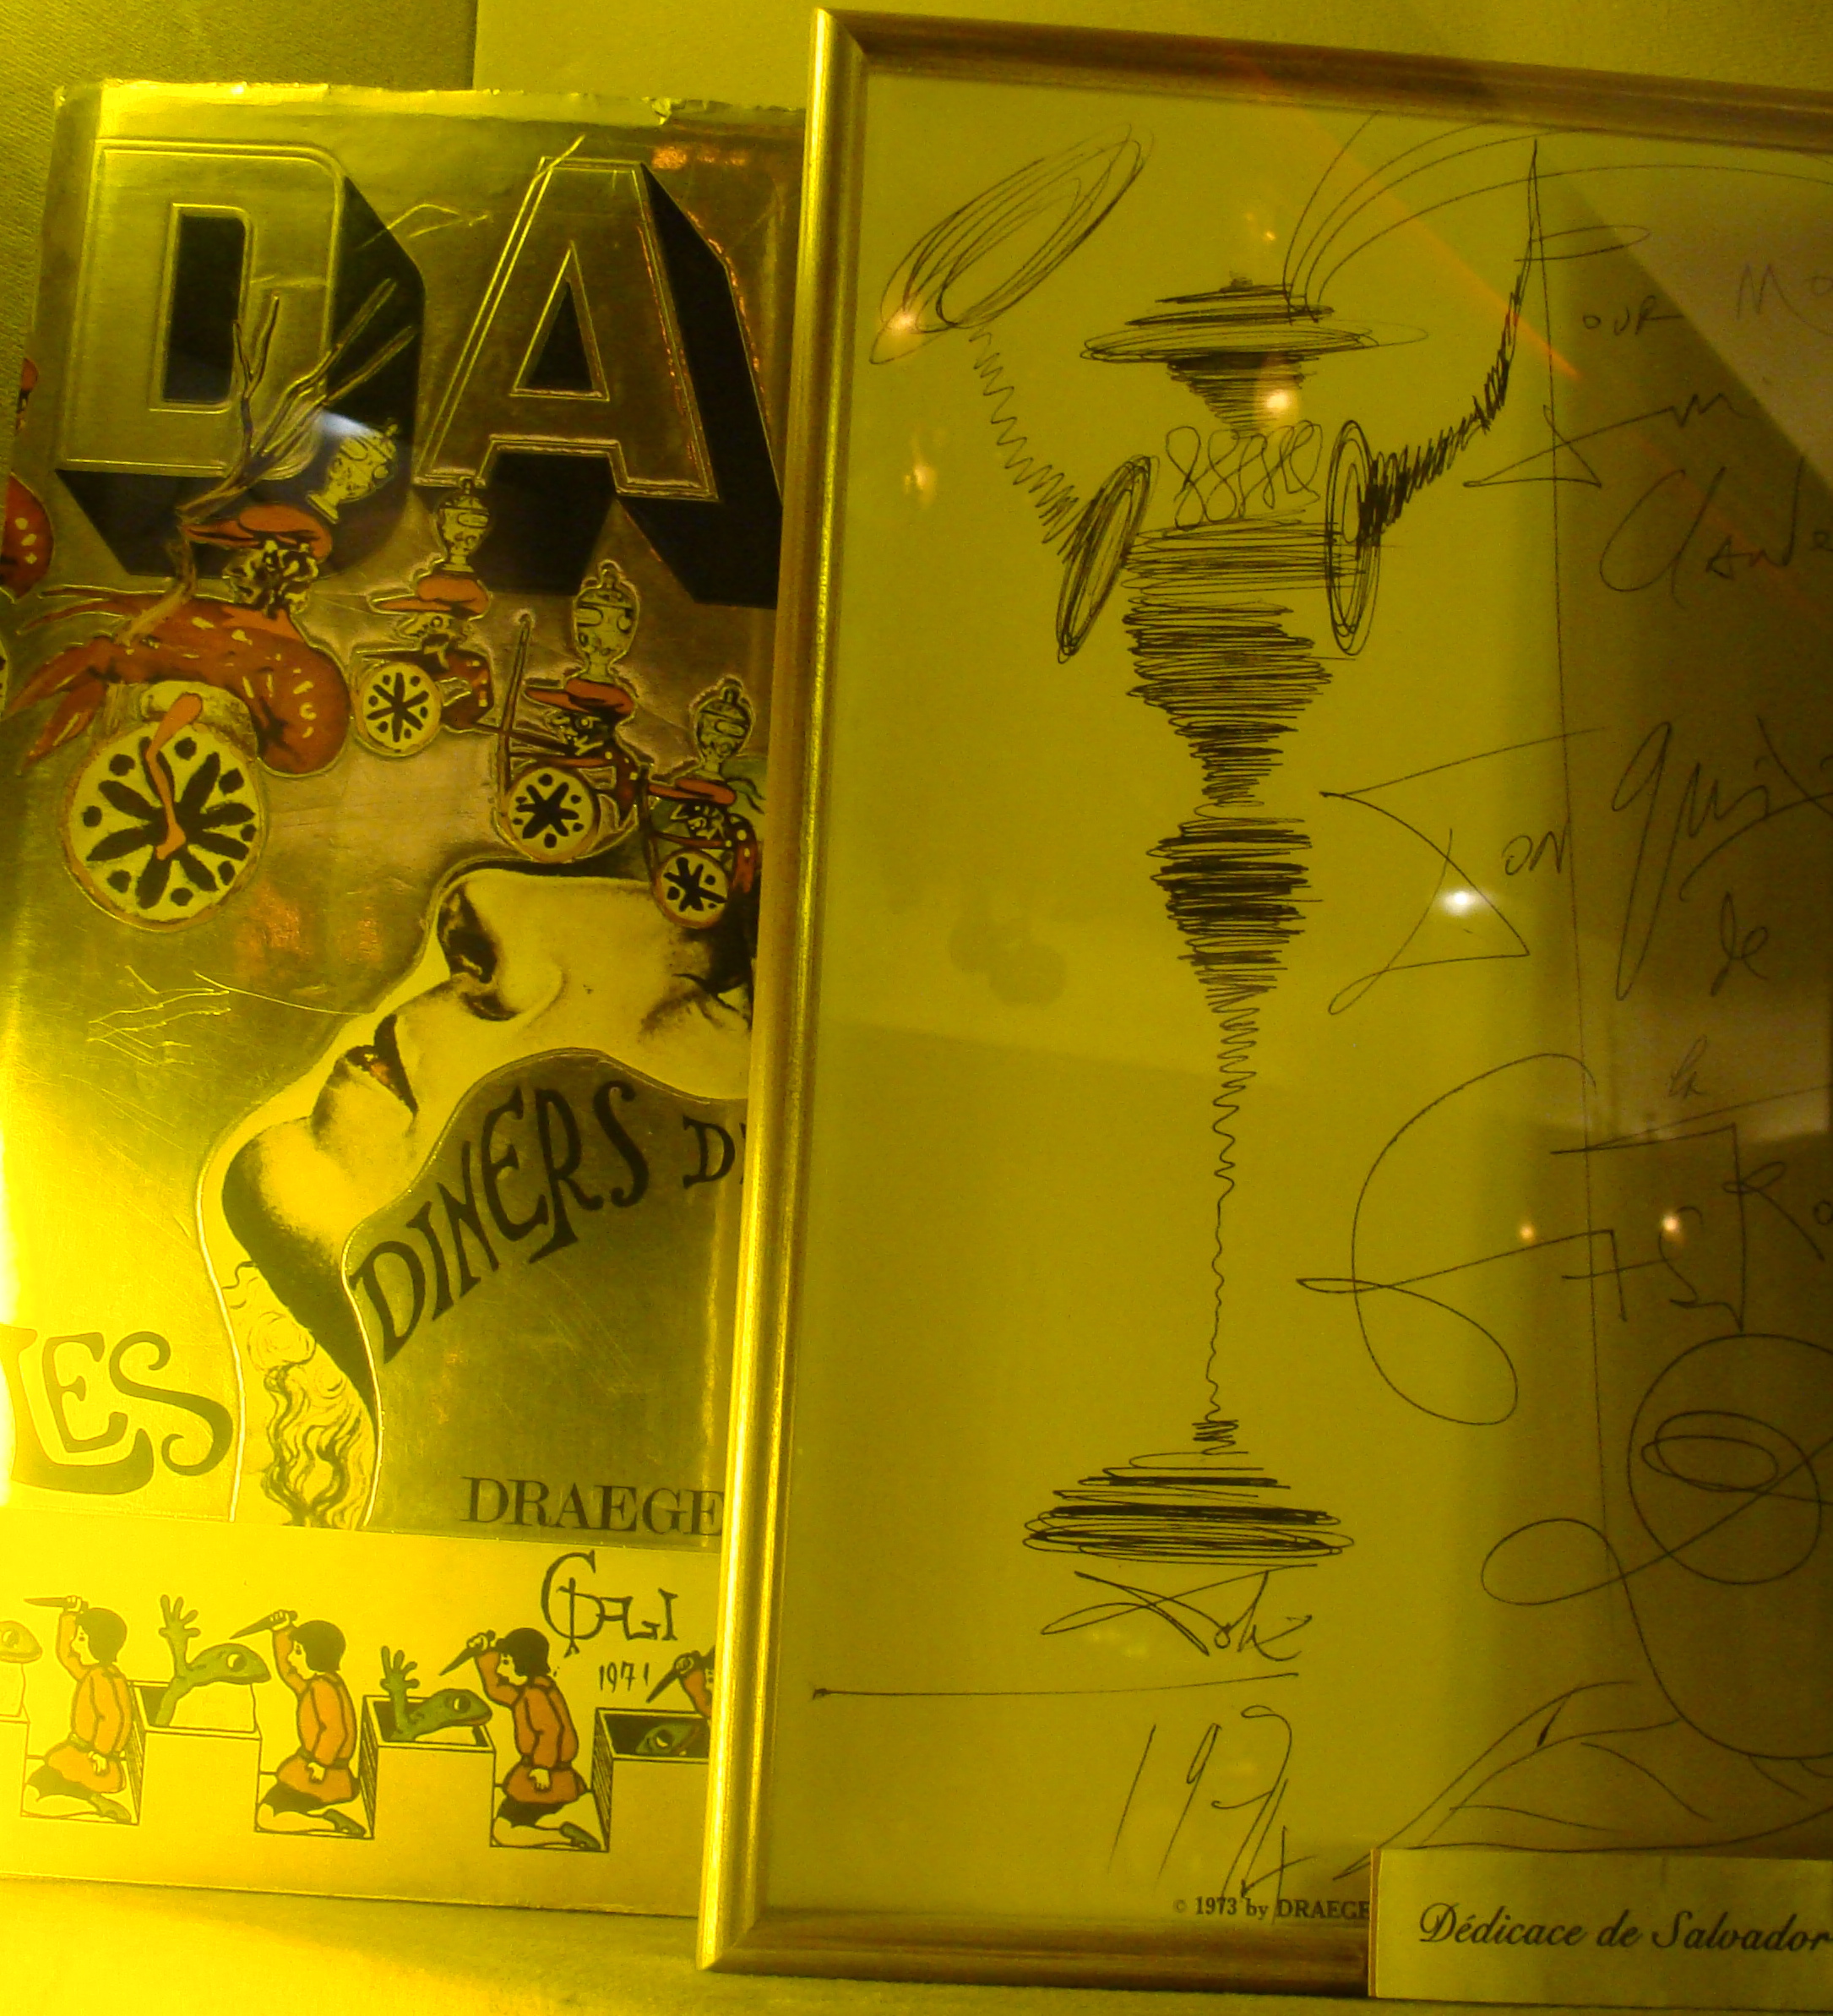 A drawing from S. Dali for La Tour d'Argent